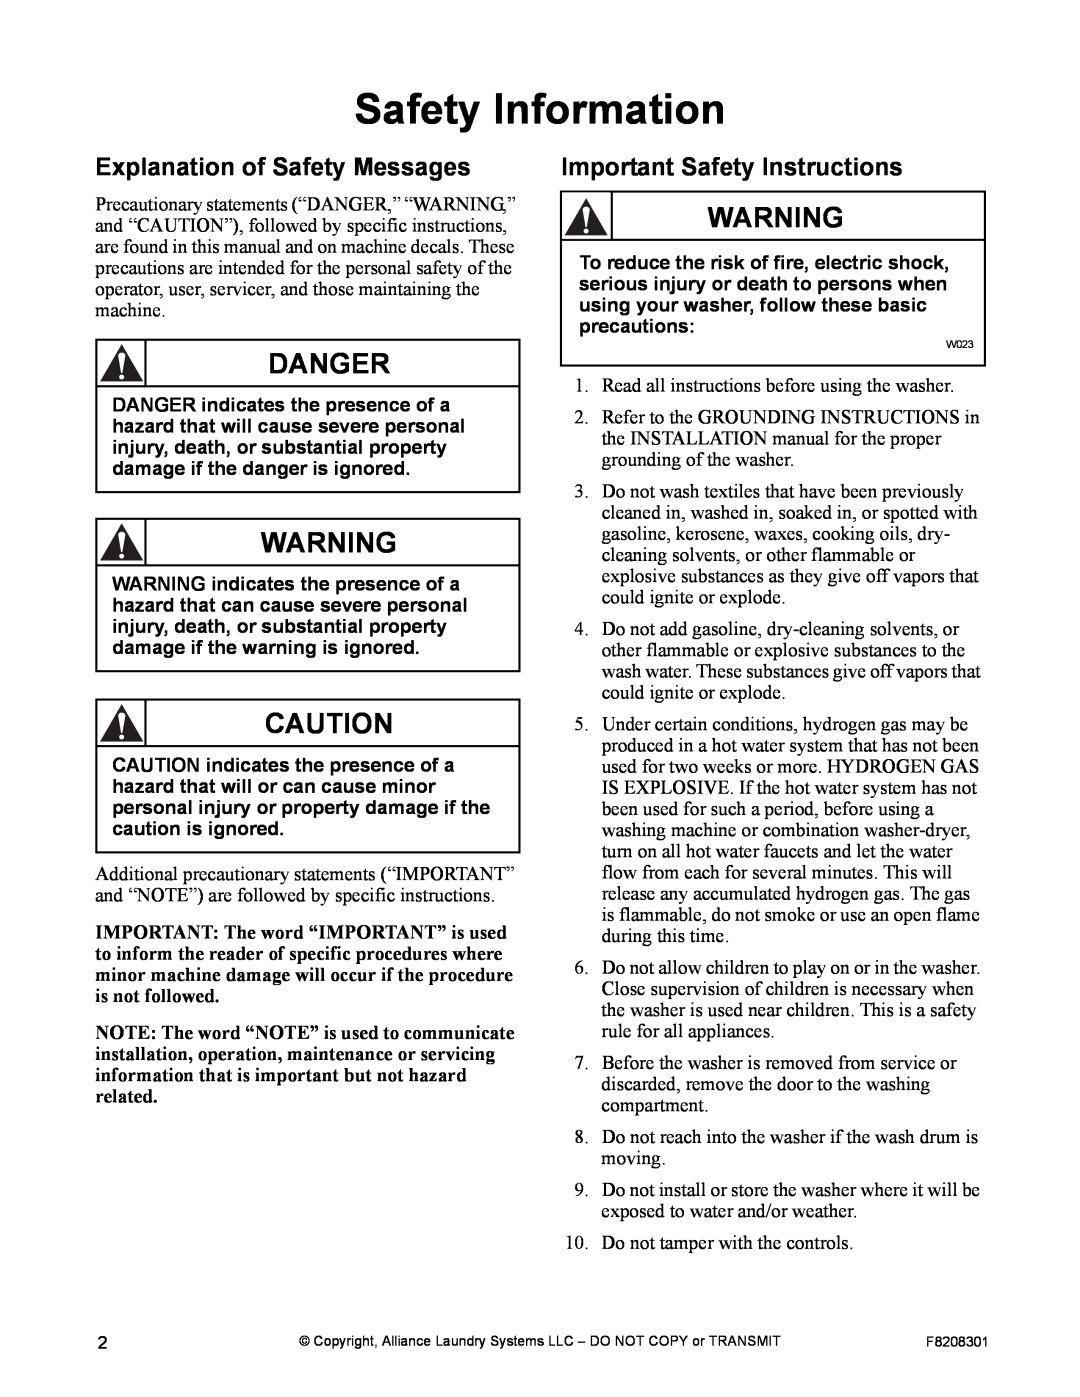 Alliance Laundry Systems CHM1772C manual Safety Information, Danger, Explanation of Safety Messages 